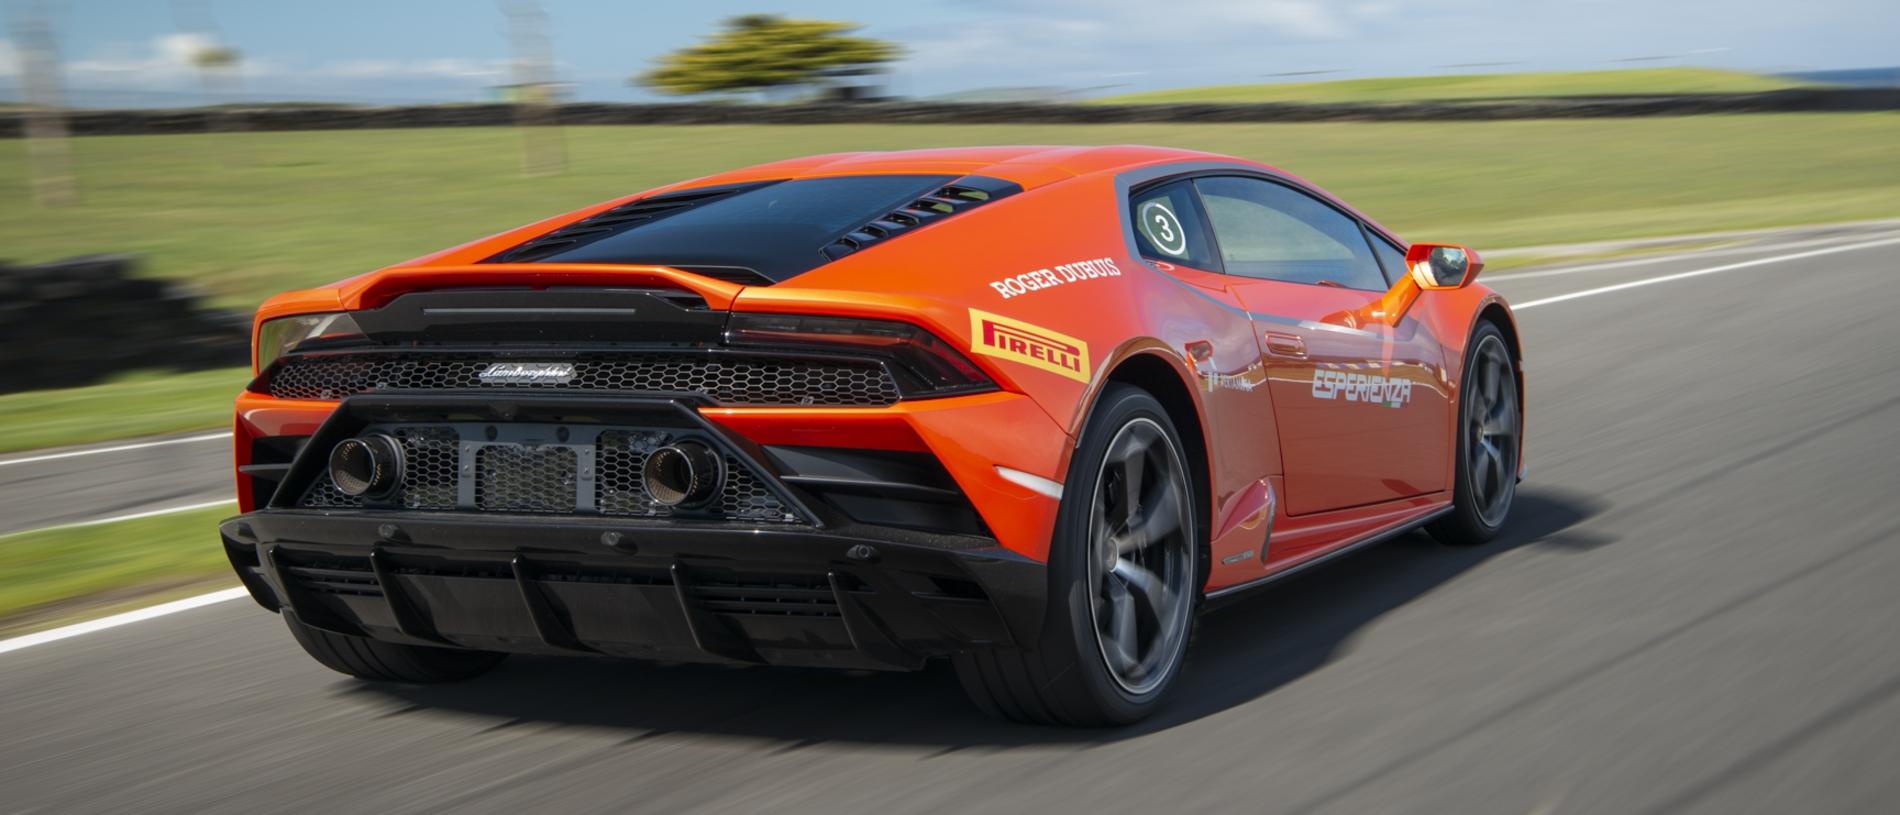 Huracan Evo: Extra grip and stability, making the midlife update more than just a facelift